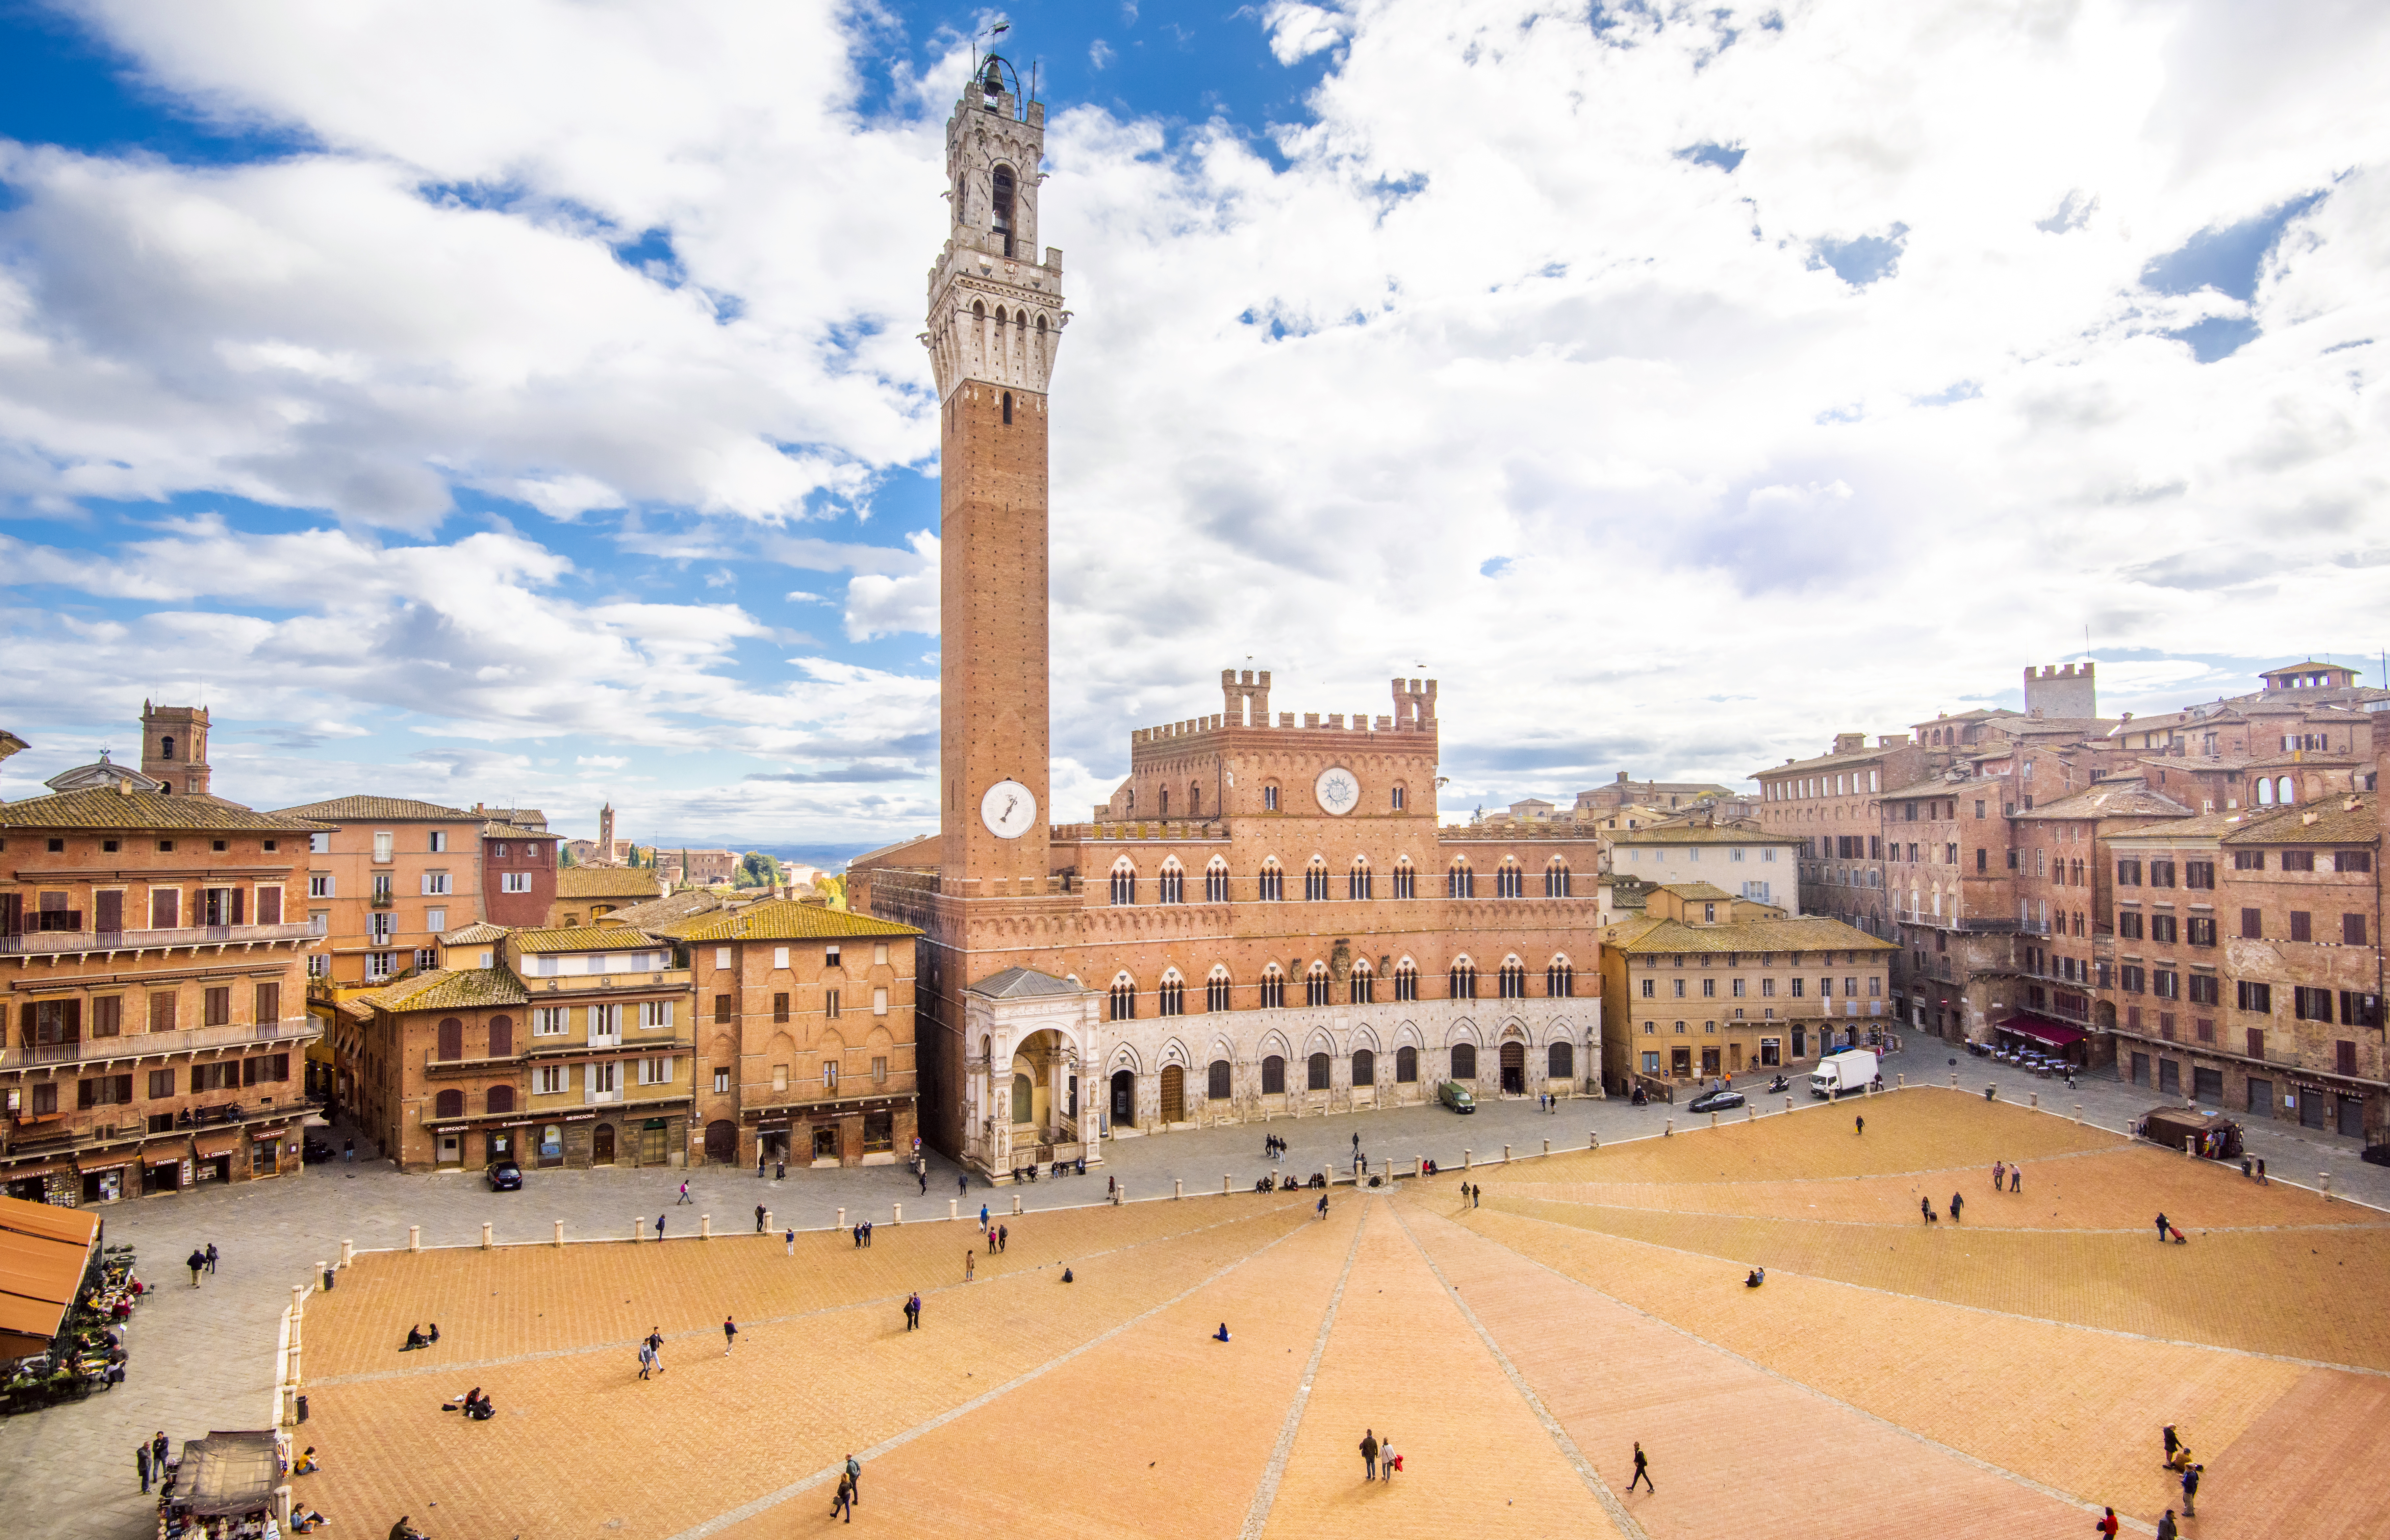 What to see for free in Siena